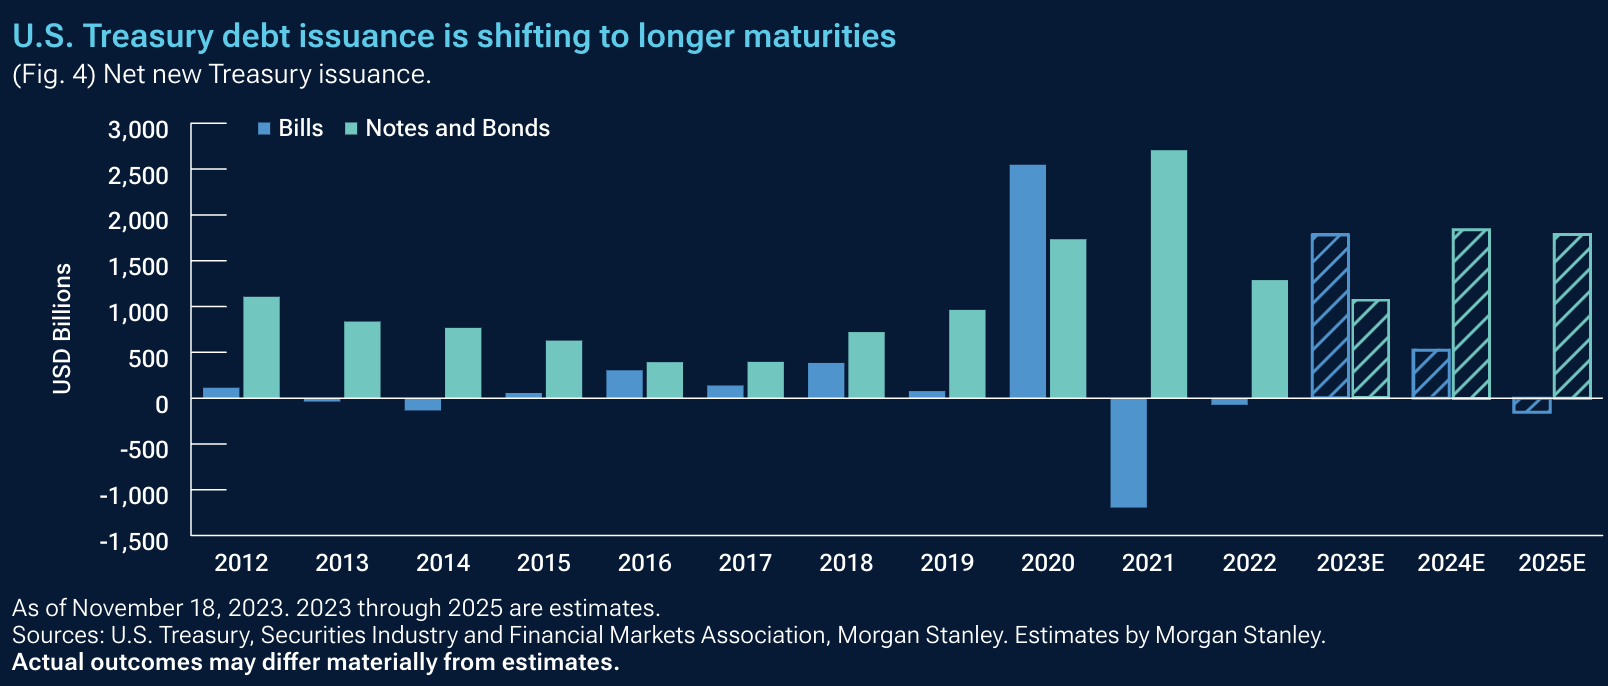 More spending means more debt to issue which means more volatility for bond investors. (Source: T. Rowe Price, US Treasury)